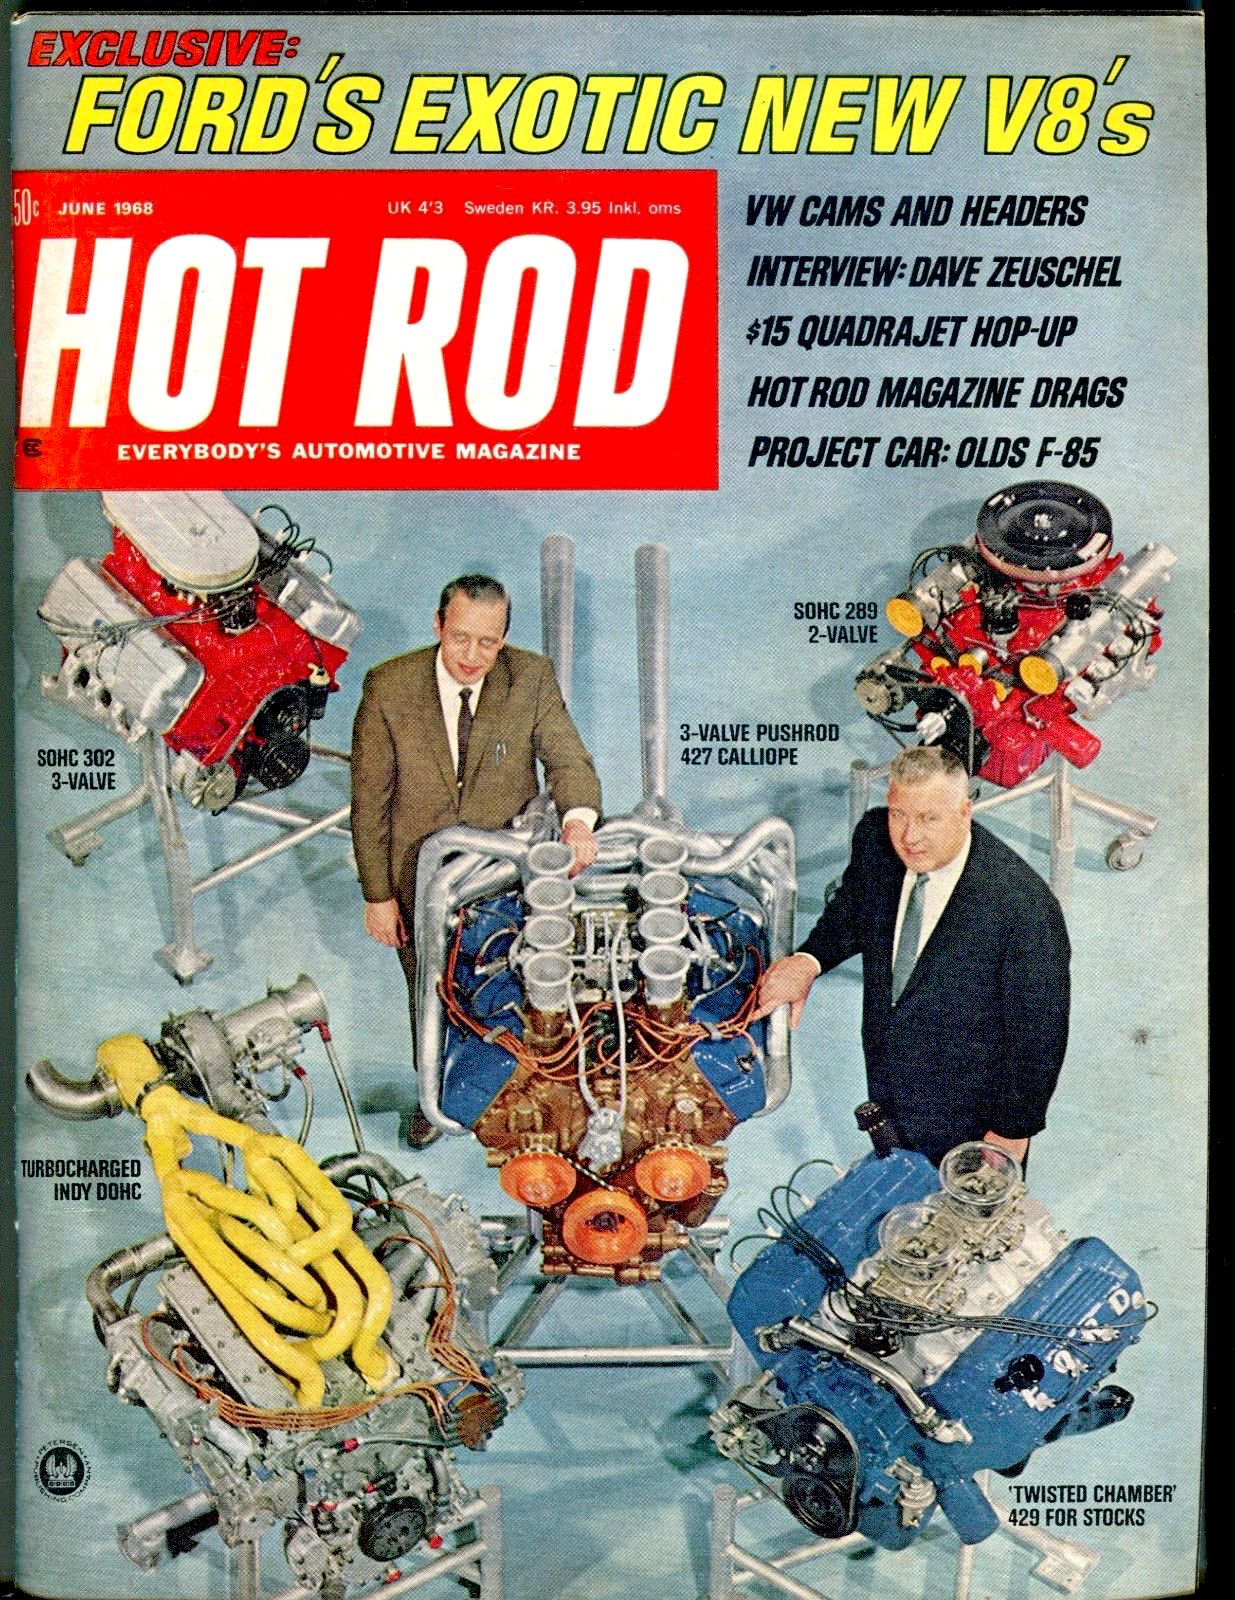 Time Capsule: Magazine covers from June 1968.